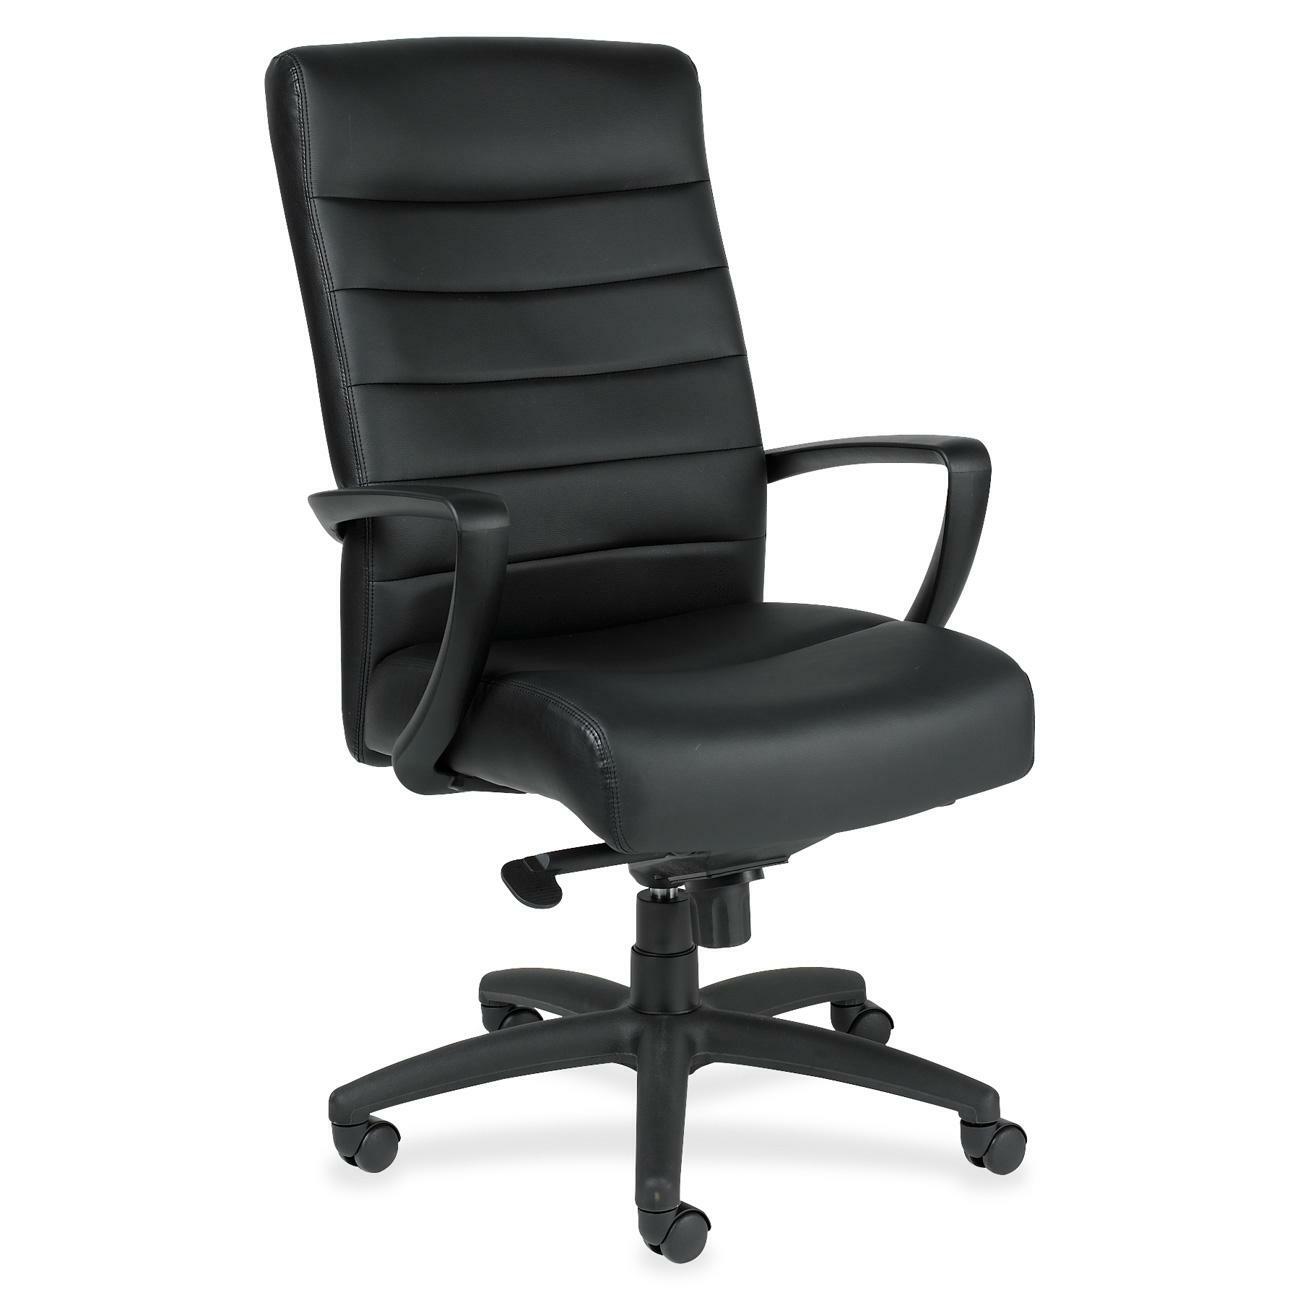 Eurotech Manchester High Back Executive Chair - Black Leather Seat - Black Leather Back - Steel Frame - 5-star Base - 1 Each - 1